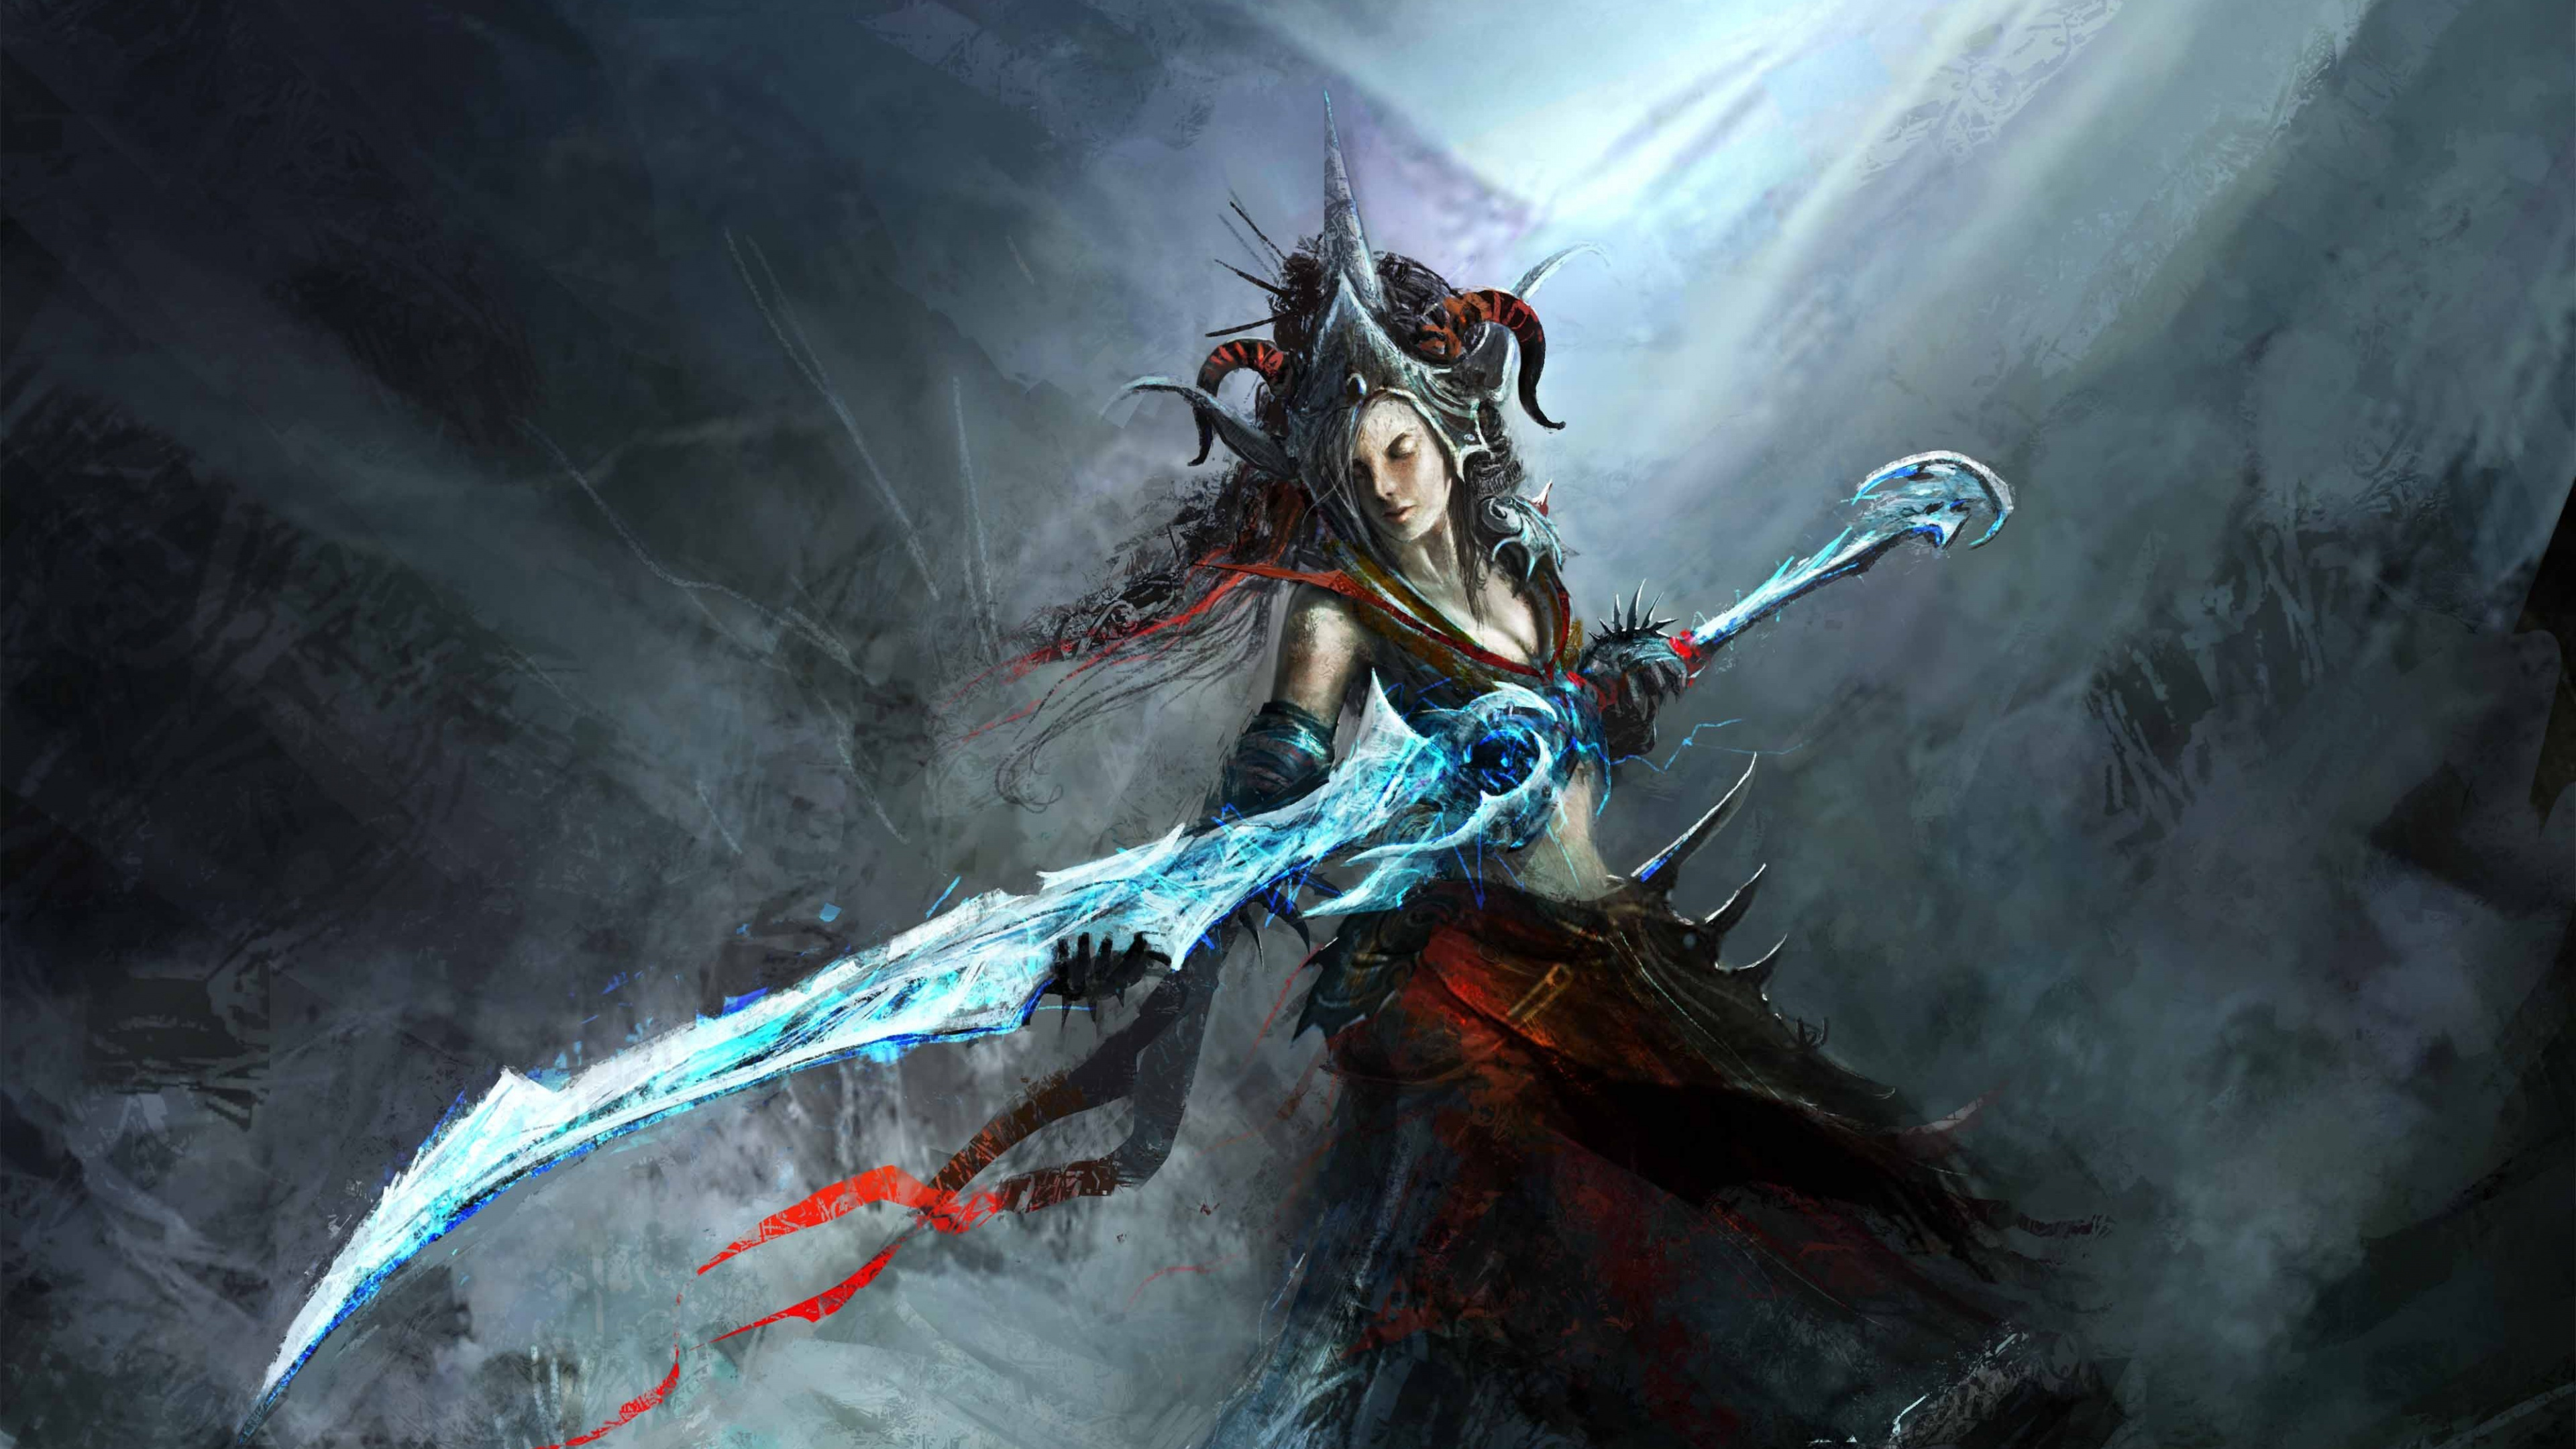 Woman in Blue Dress Holding a Sword Illustration. Wallpaper in 3840x2160 Resolution